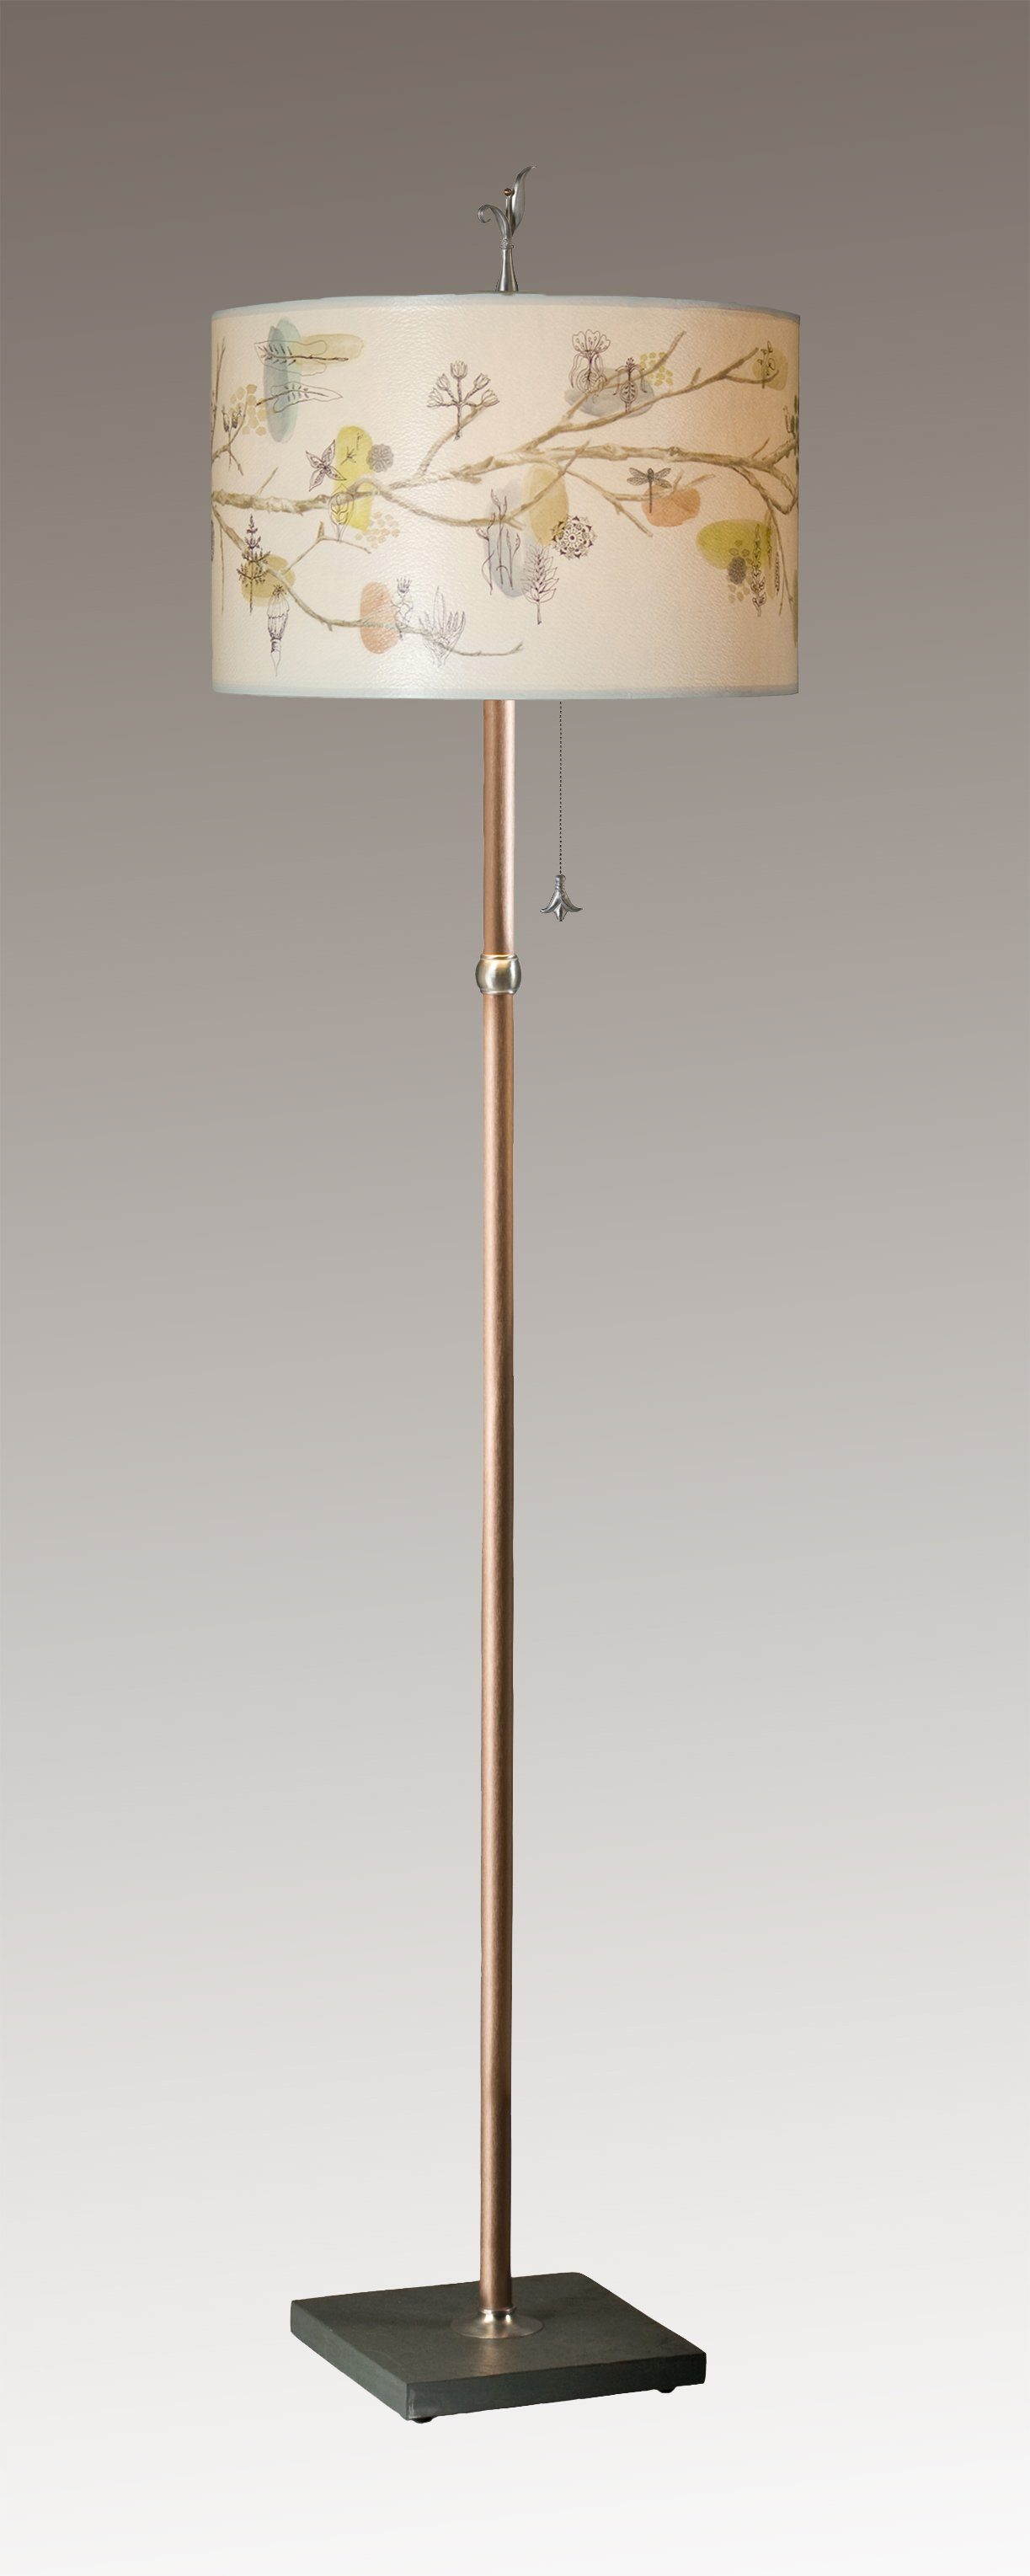 Janna Ugone & Co Floor Lamps Copper Floor Lamp with Large Drum Shade in Artful Branch